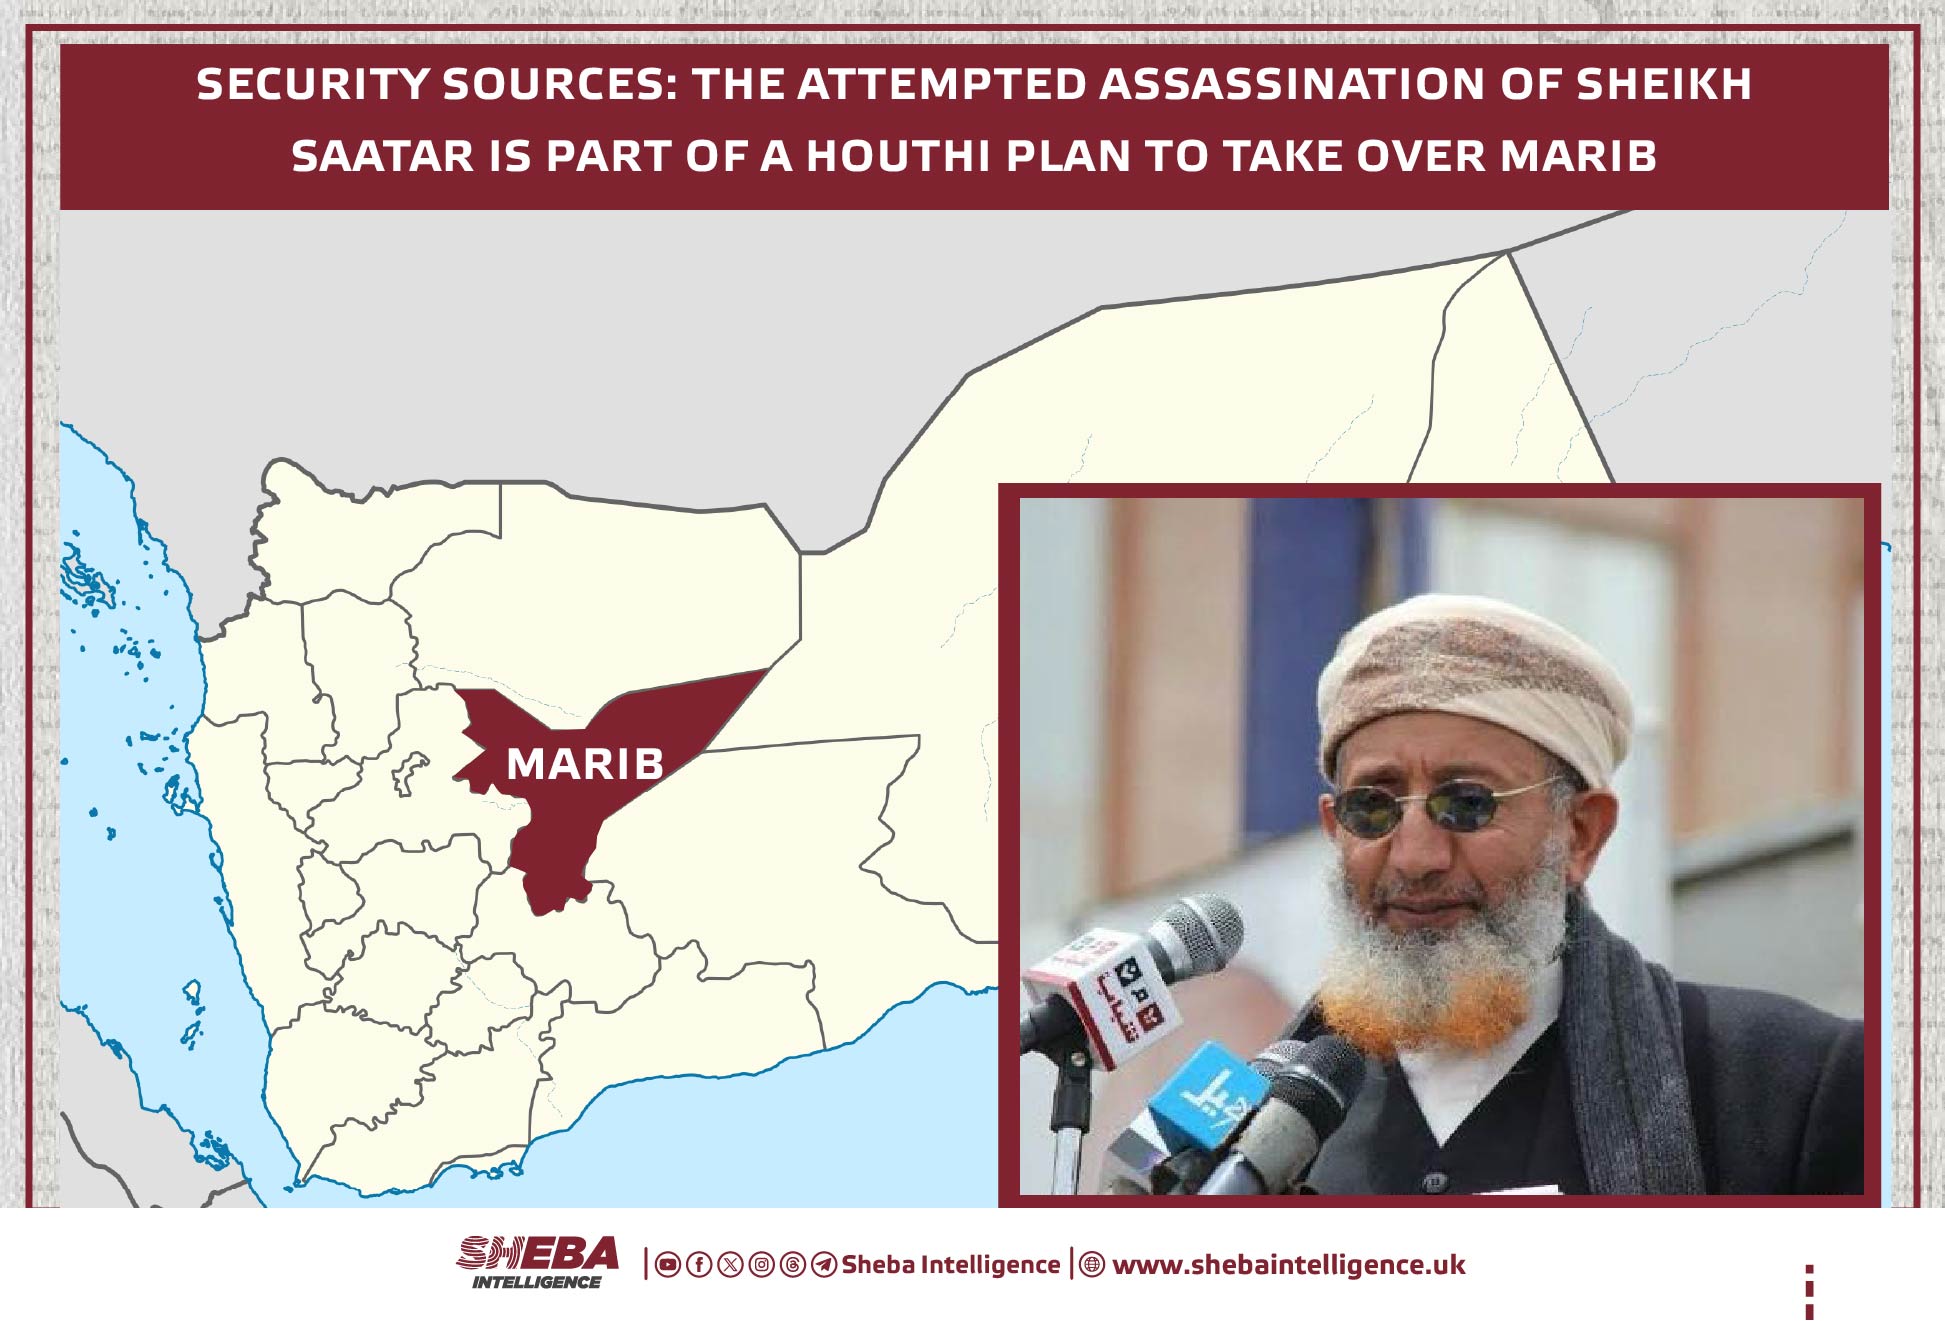 Security Sources: The attemptedassassination of Sheikh Saatar is part of a Houthi plan to take over Marib